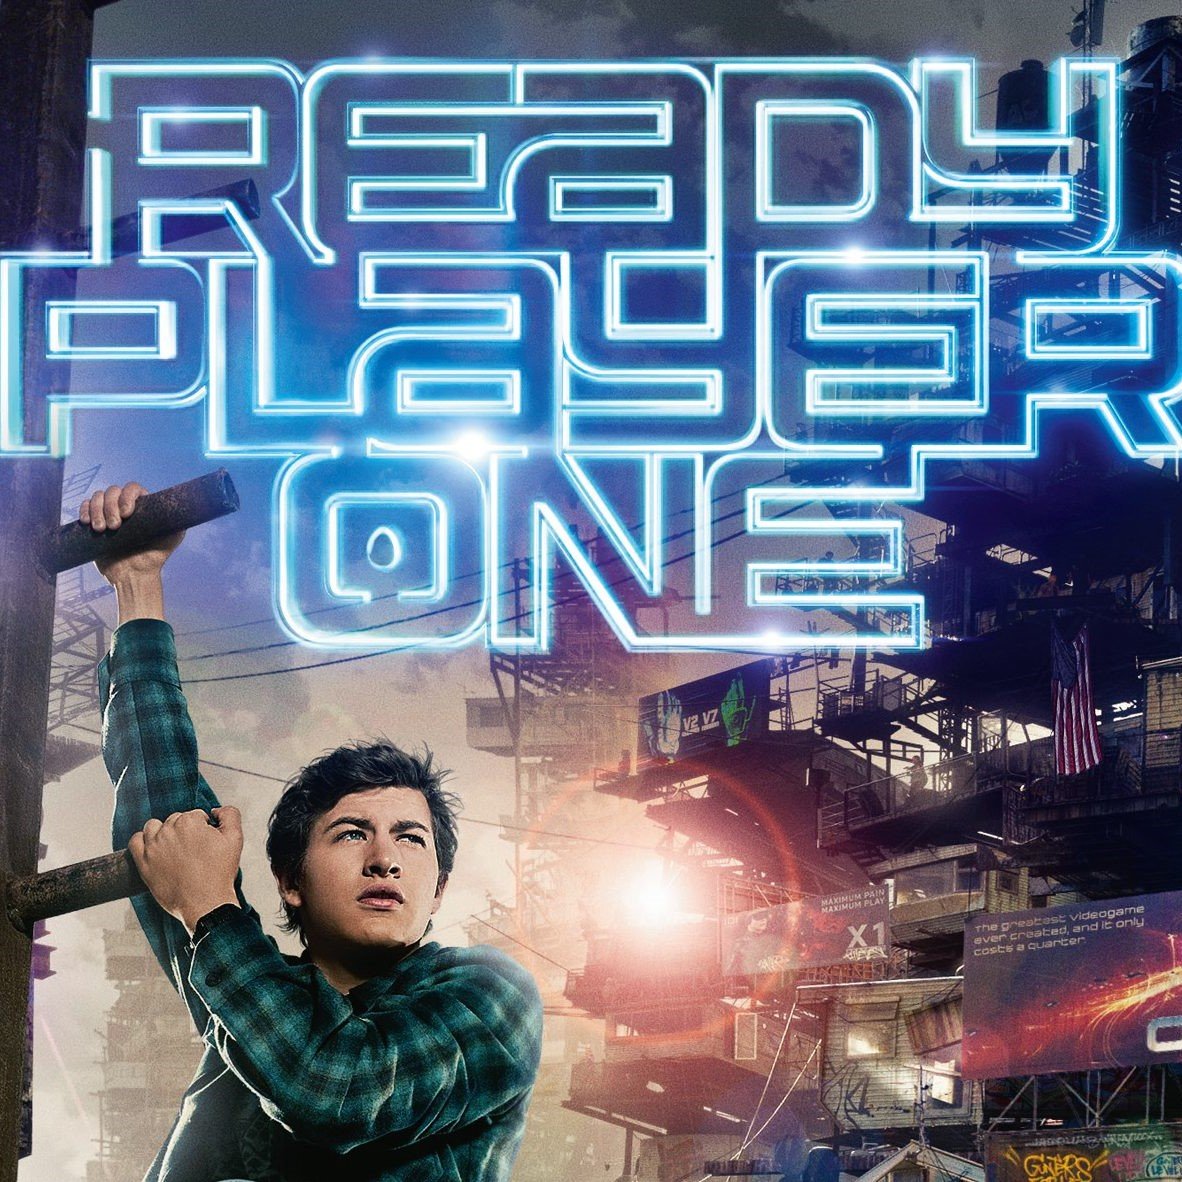 ready player one audio book